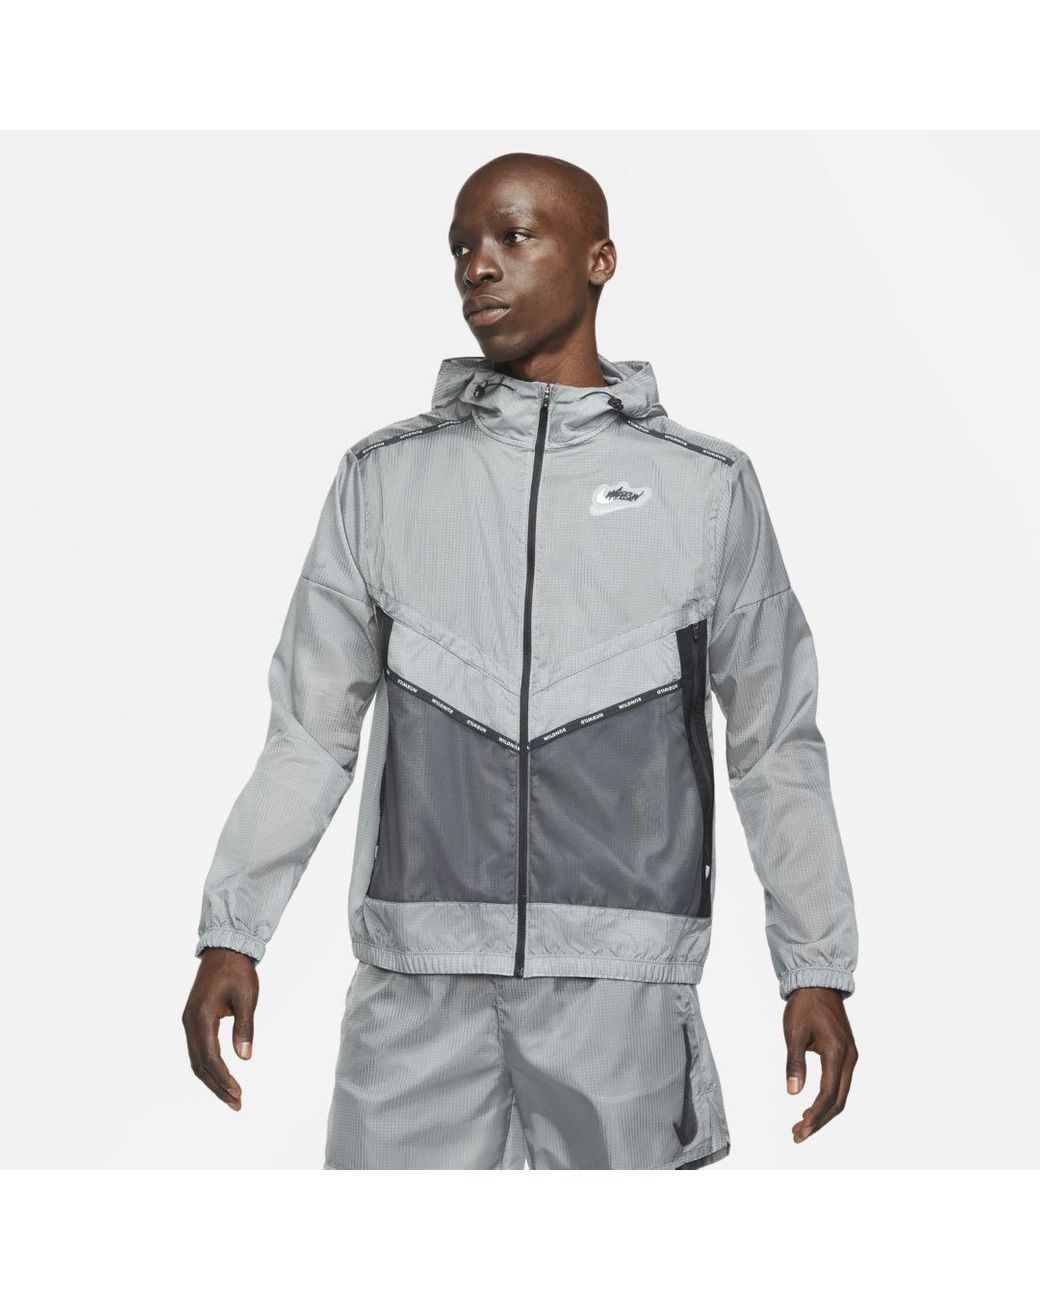 Pies suaves Perder la paciencia obra maestra Nike Repel Wild Run Windrunner Graphic Running Jacket in Gray for Men | Lyst